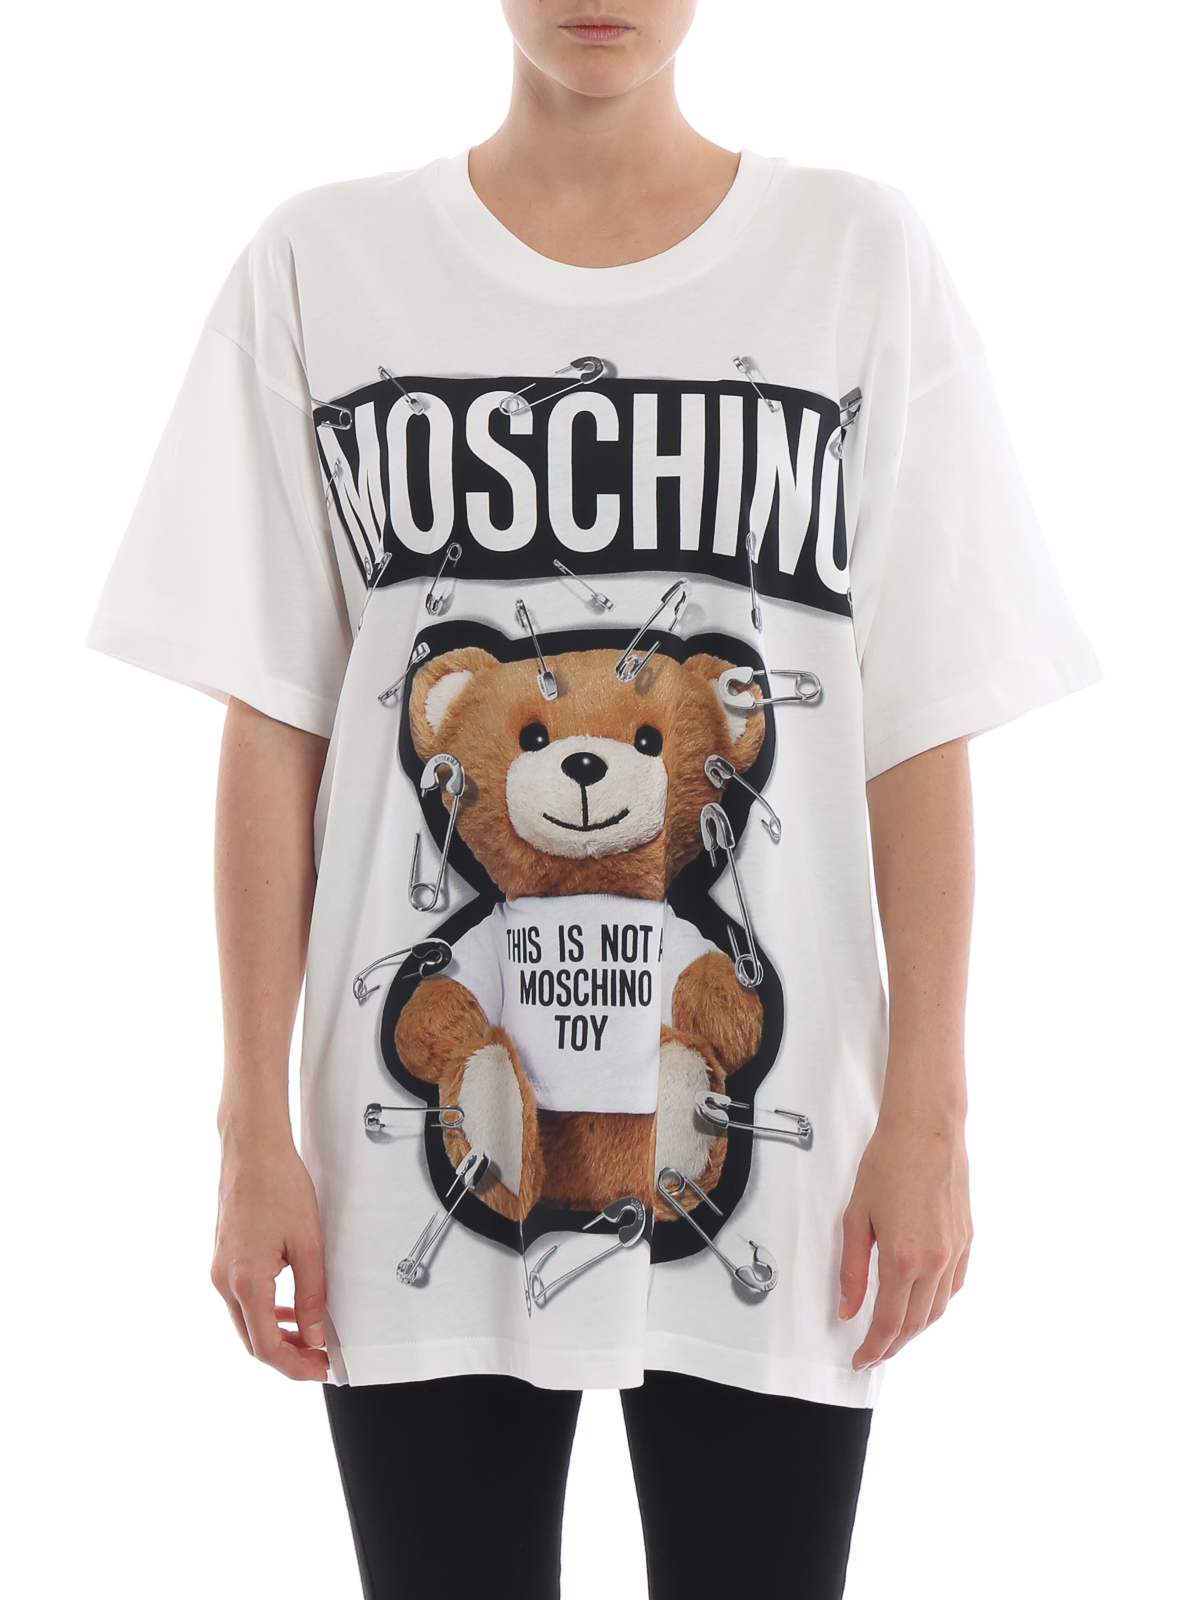 this is not a moschino toy